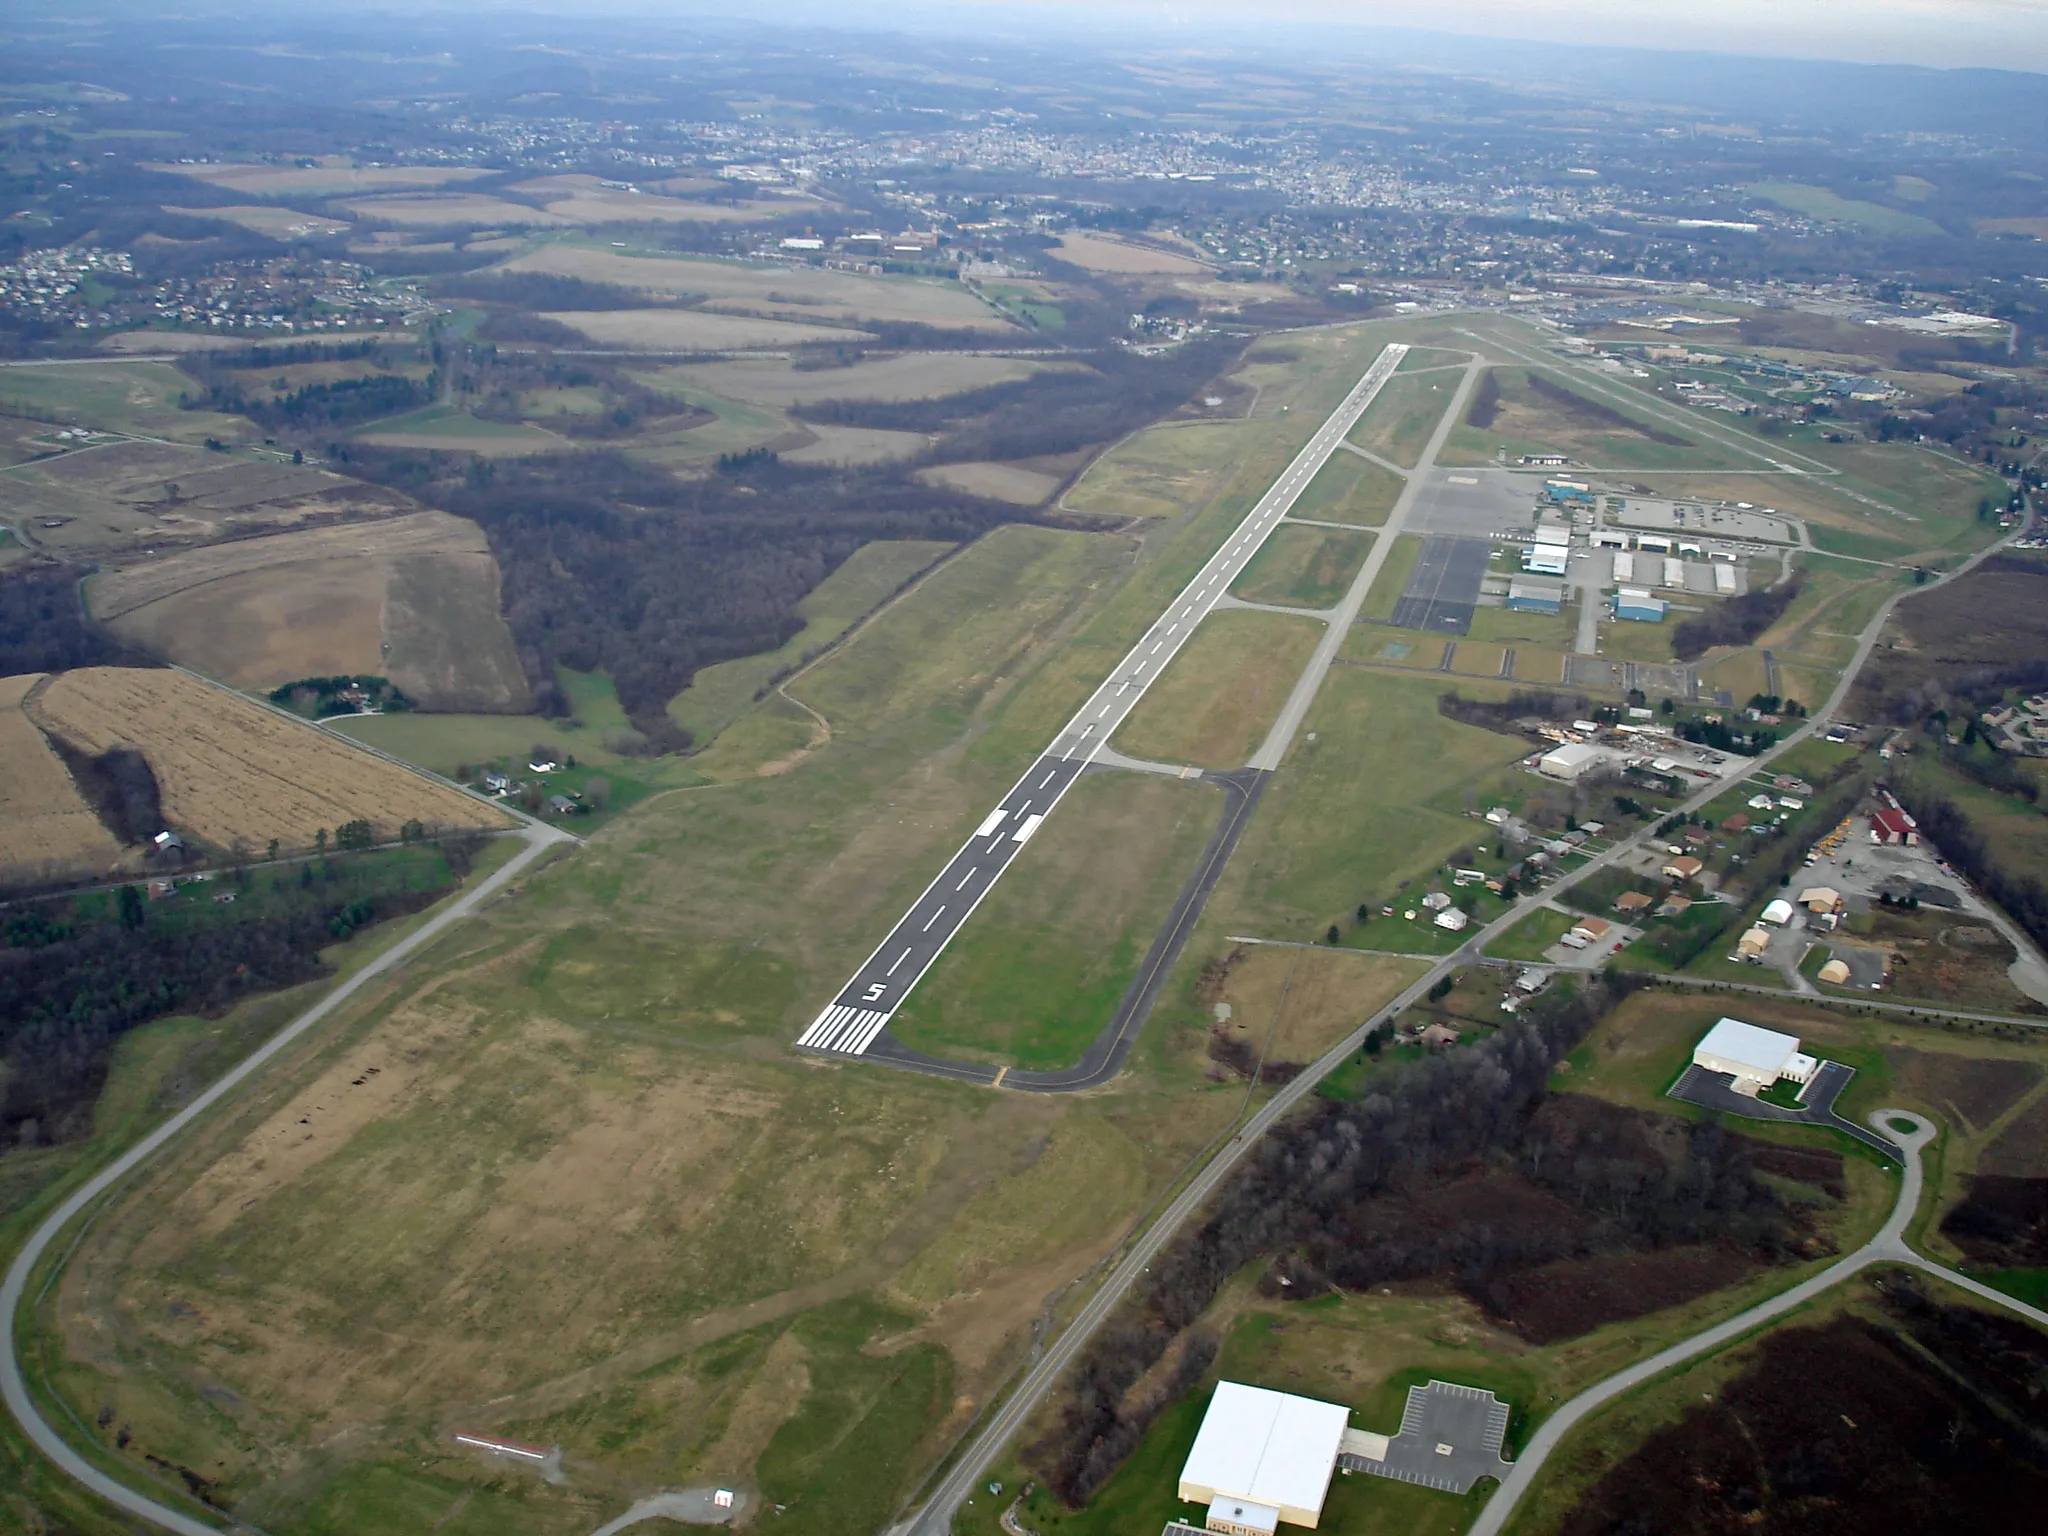 An aerial image of a rural airport and hangar with grassy fields and farmland on either side.